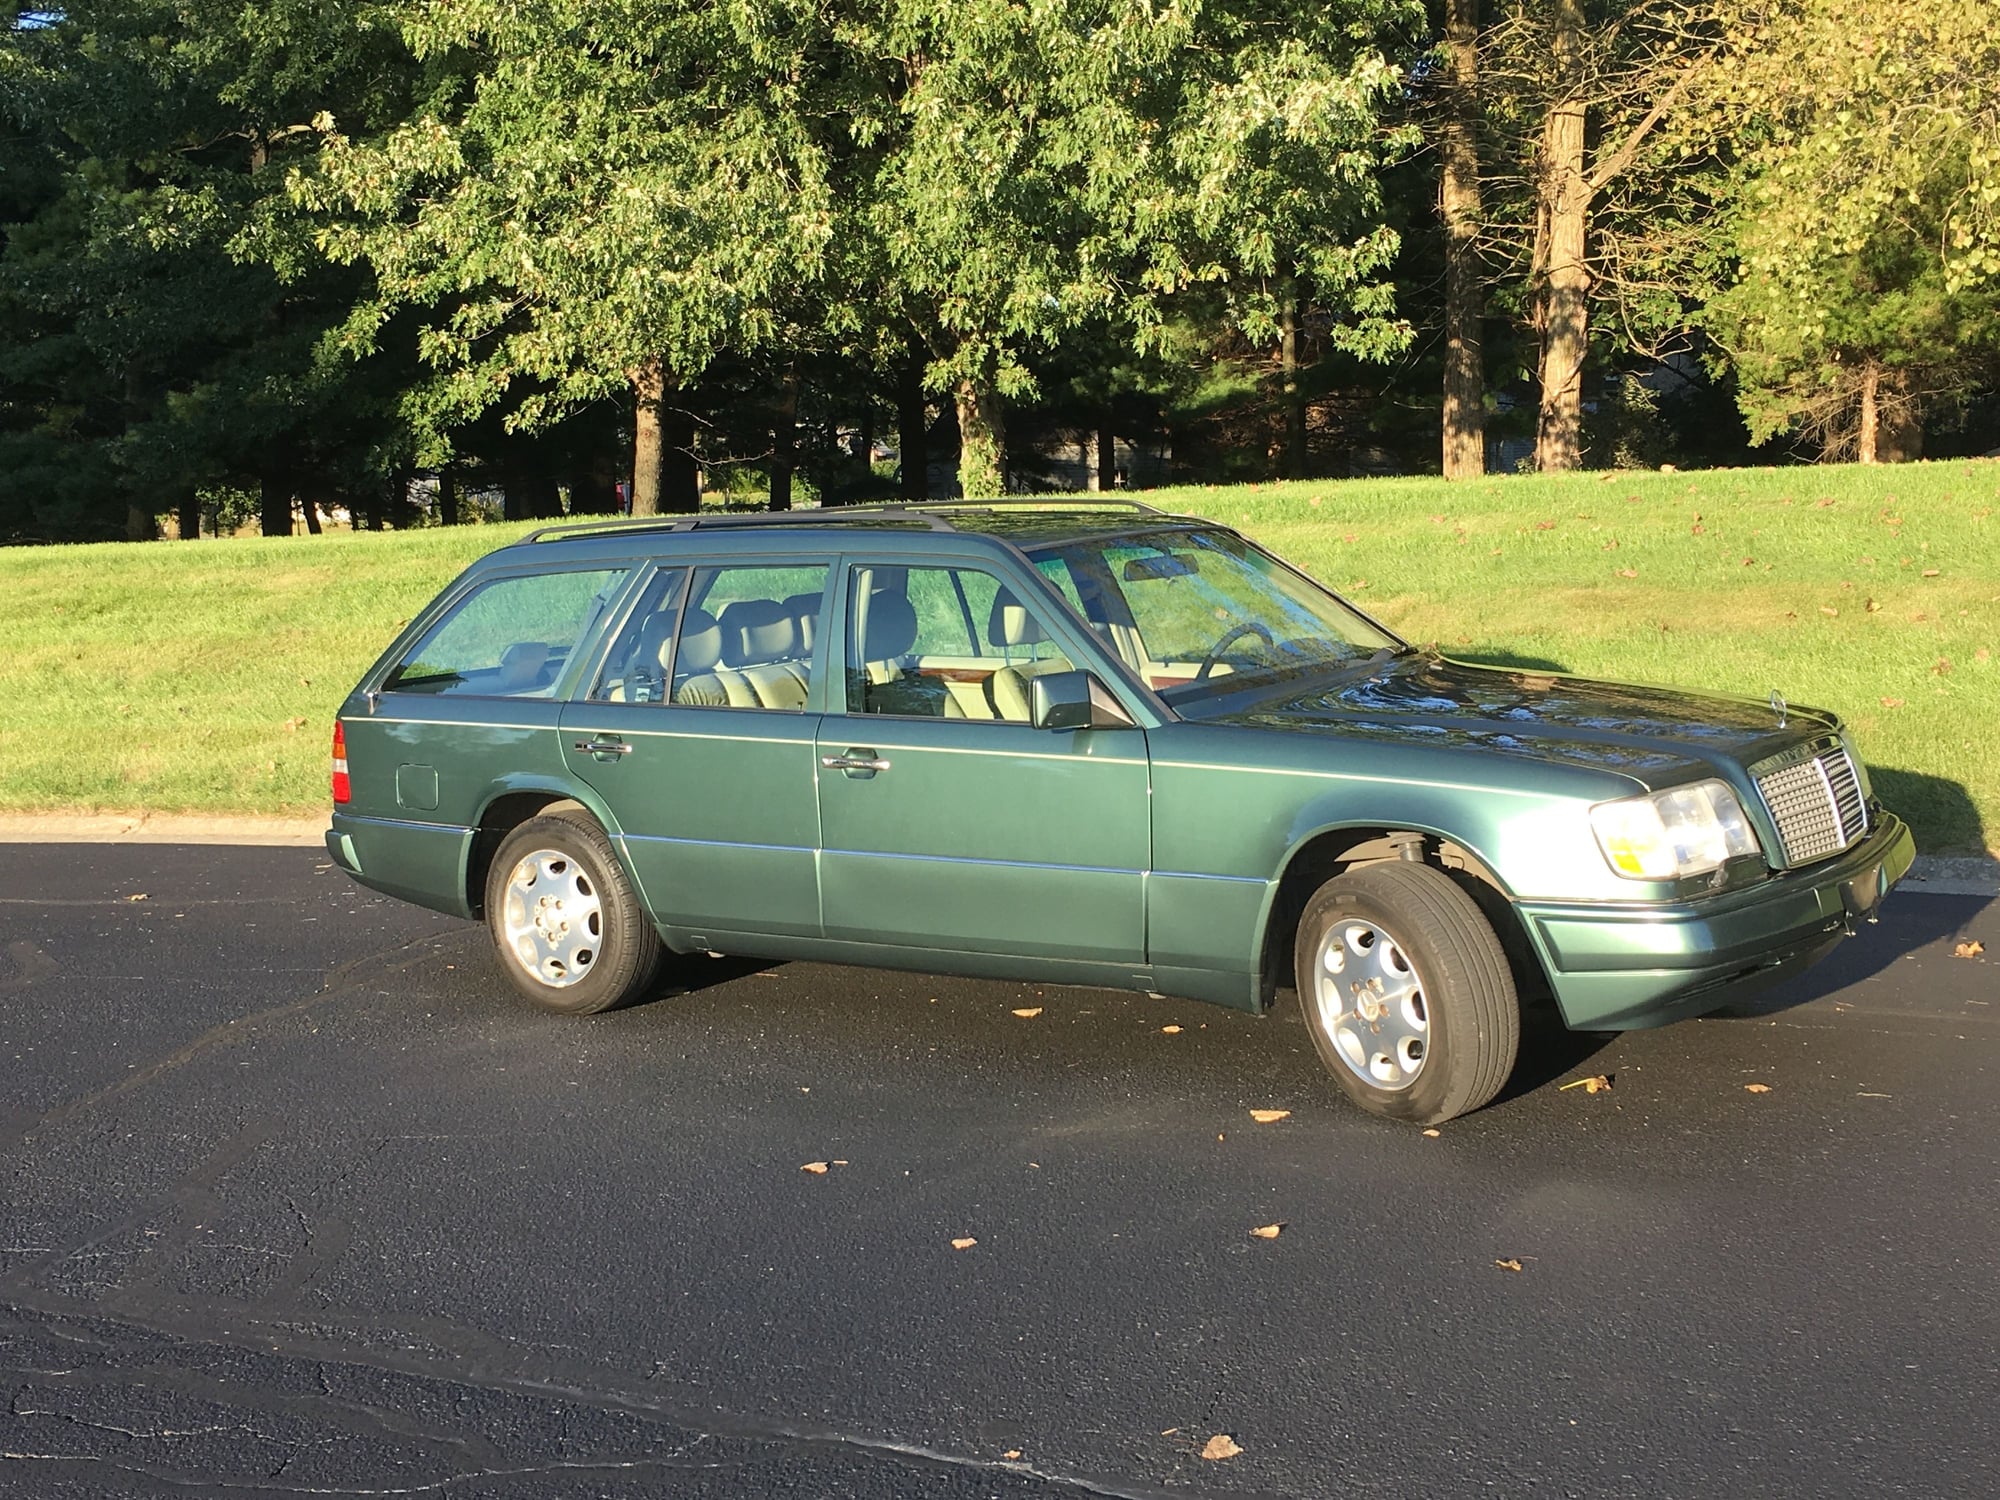 1995 Mercedes-Benz E320 - 1995 E320 W124 Wagon Great Shape Chicagoland $3,900 - Used - VIN WDBEA92E3SF332500 - 127,036 Miles - 6 cyl - 2WD - Automatic - Wagon - Other - Griffith, IN 46319, United States